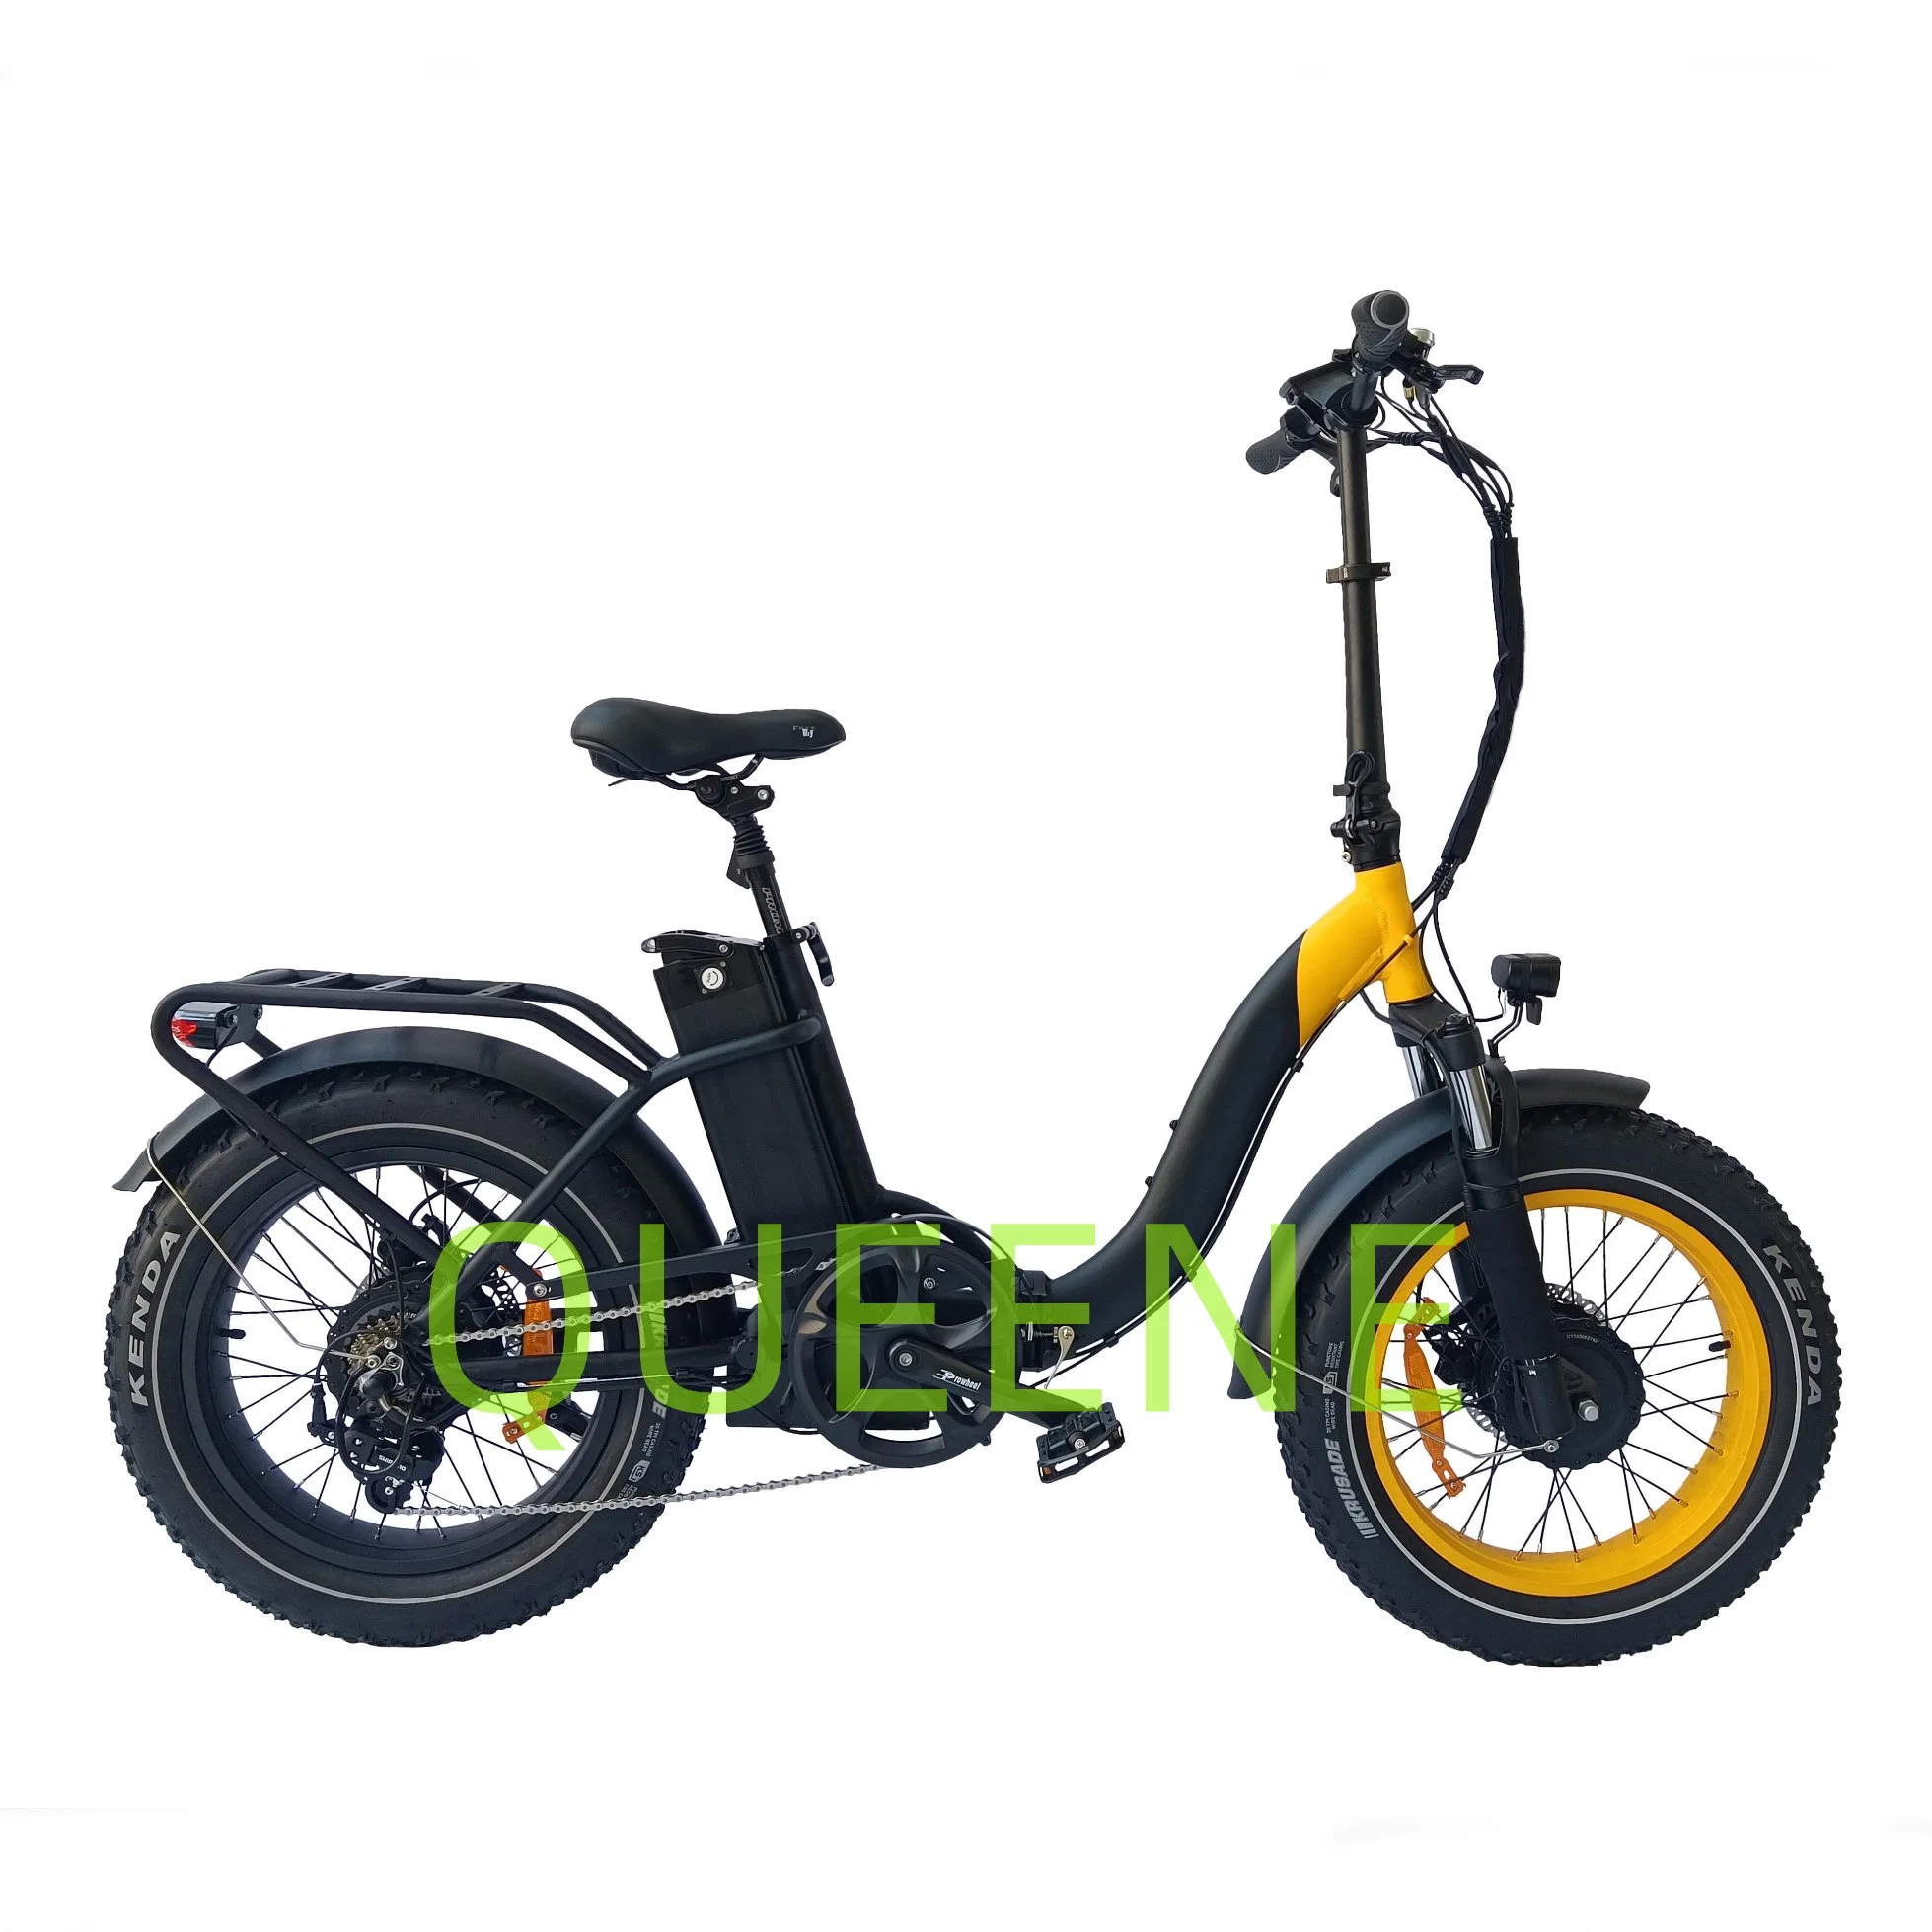 Queene/20 Inch Fat Tire Super Speed Double Motor E Bike Folding Vintage Electric Bicycle